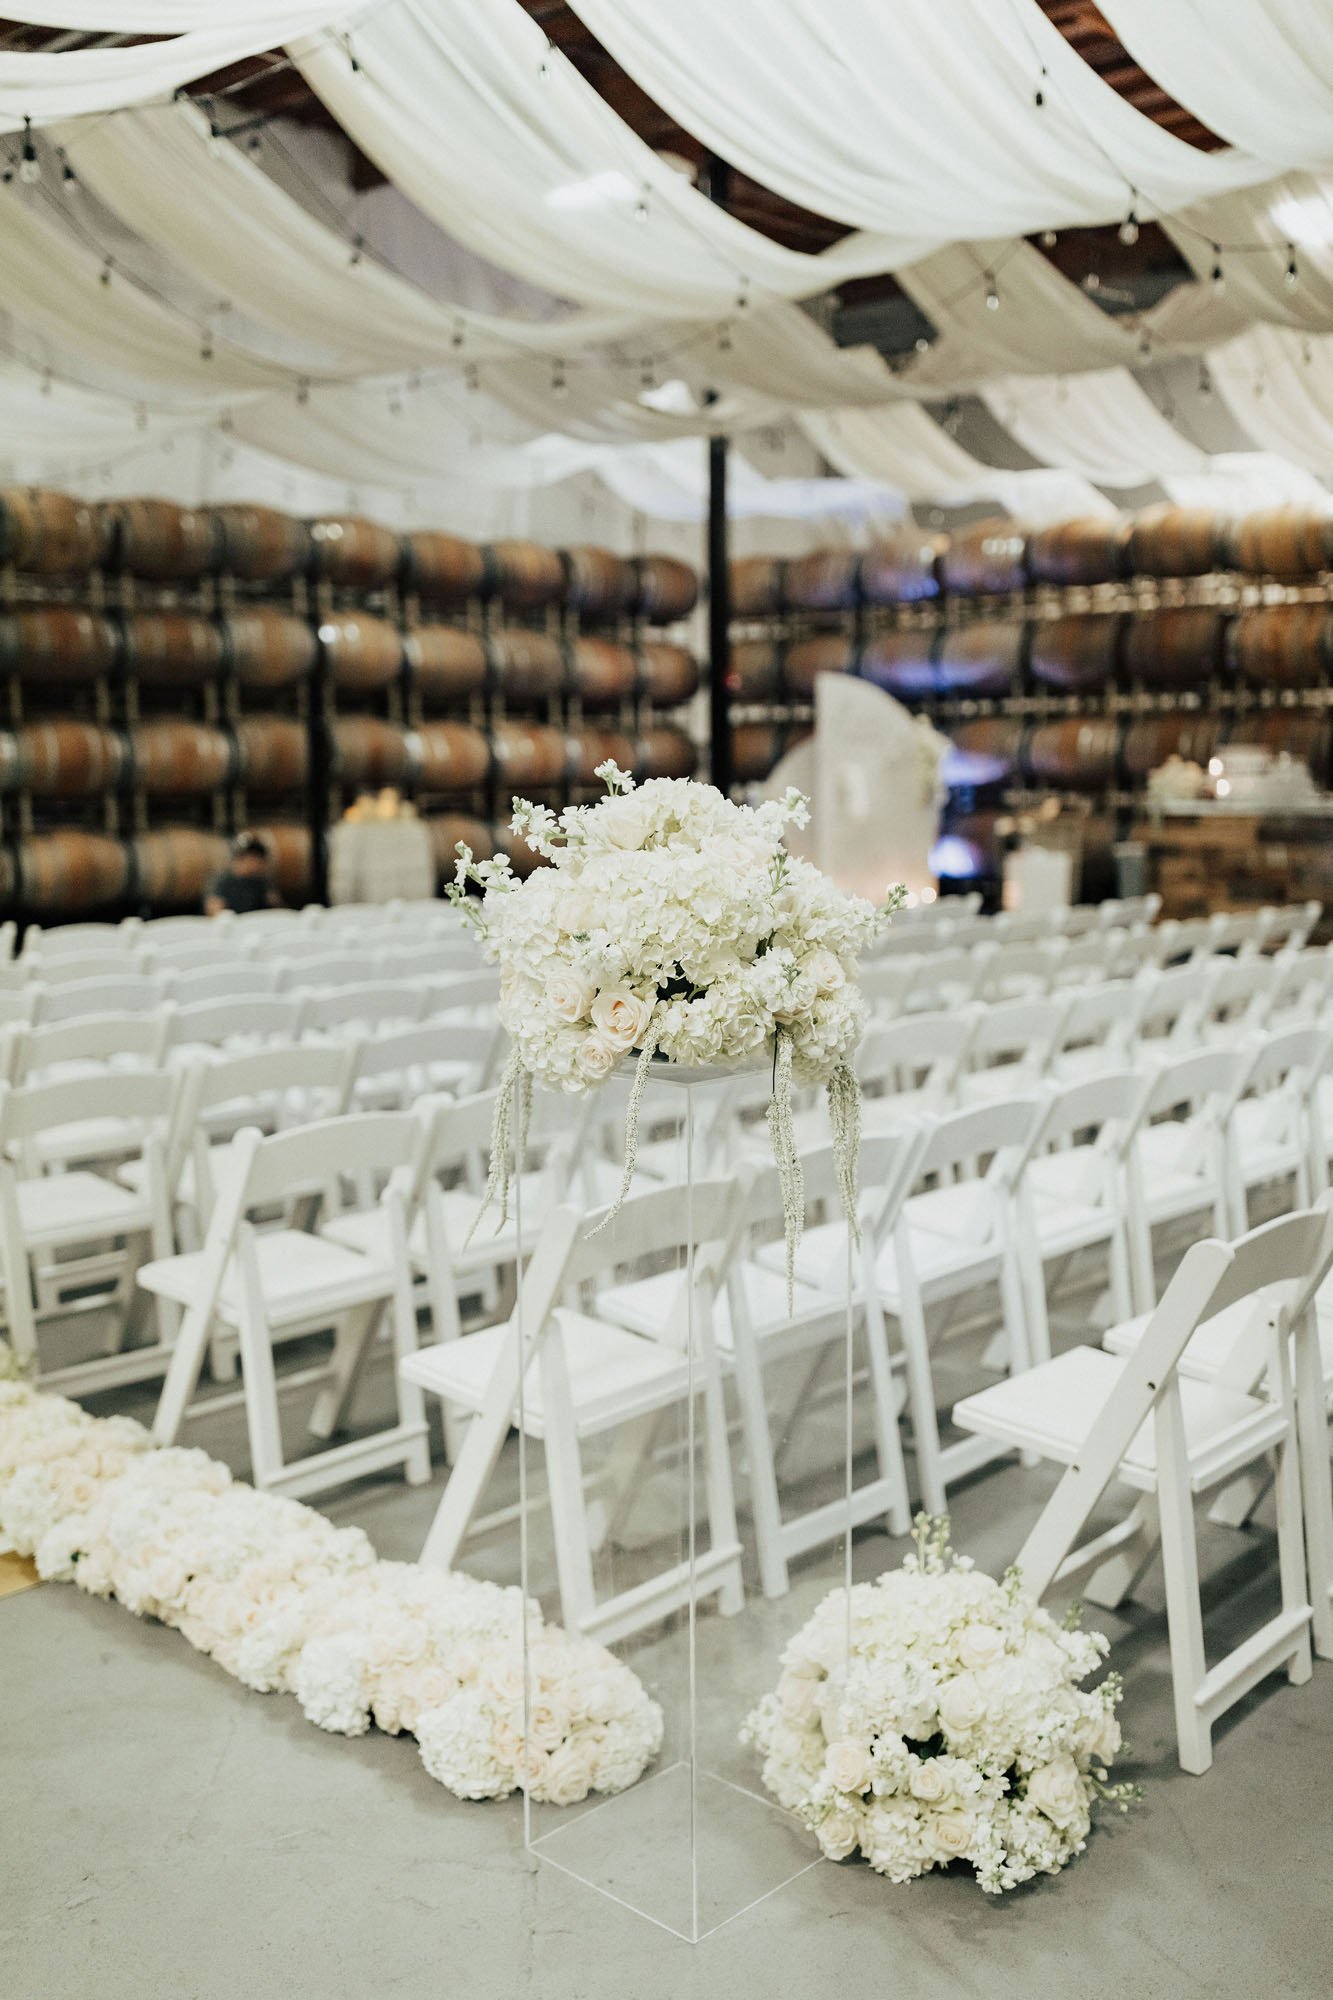  Photograph of a ceremony setup in a PNW vineyardr in Woodinville, WA. The walls are lined with oak wine barrels, the ceilings are draped with white silk, and there are decorative white wood folding chairs and white rose and hydrangea floral arrangem